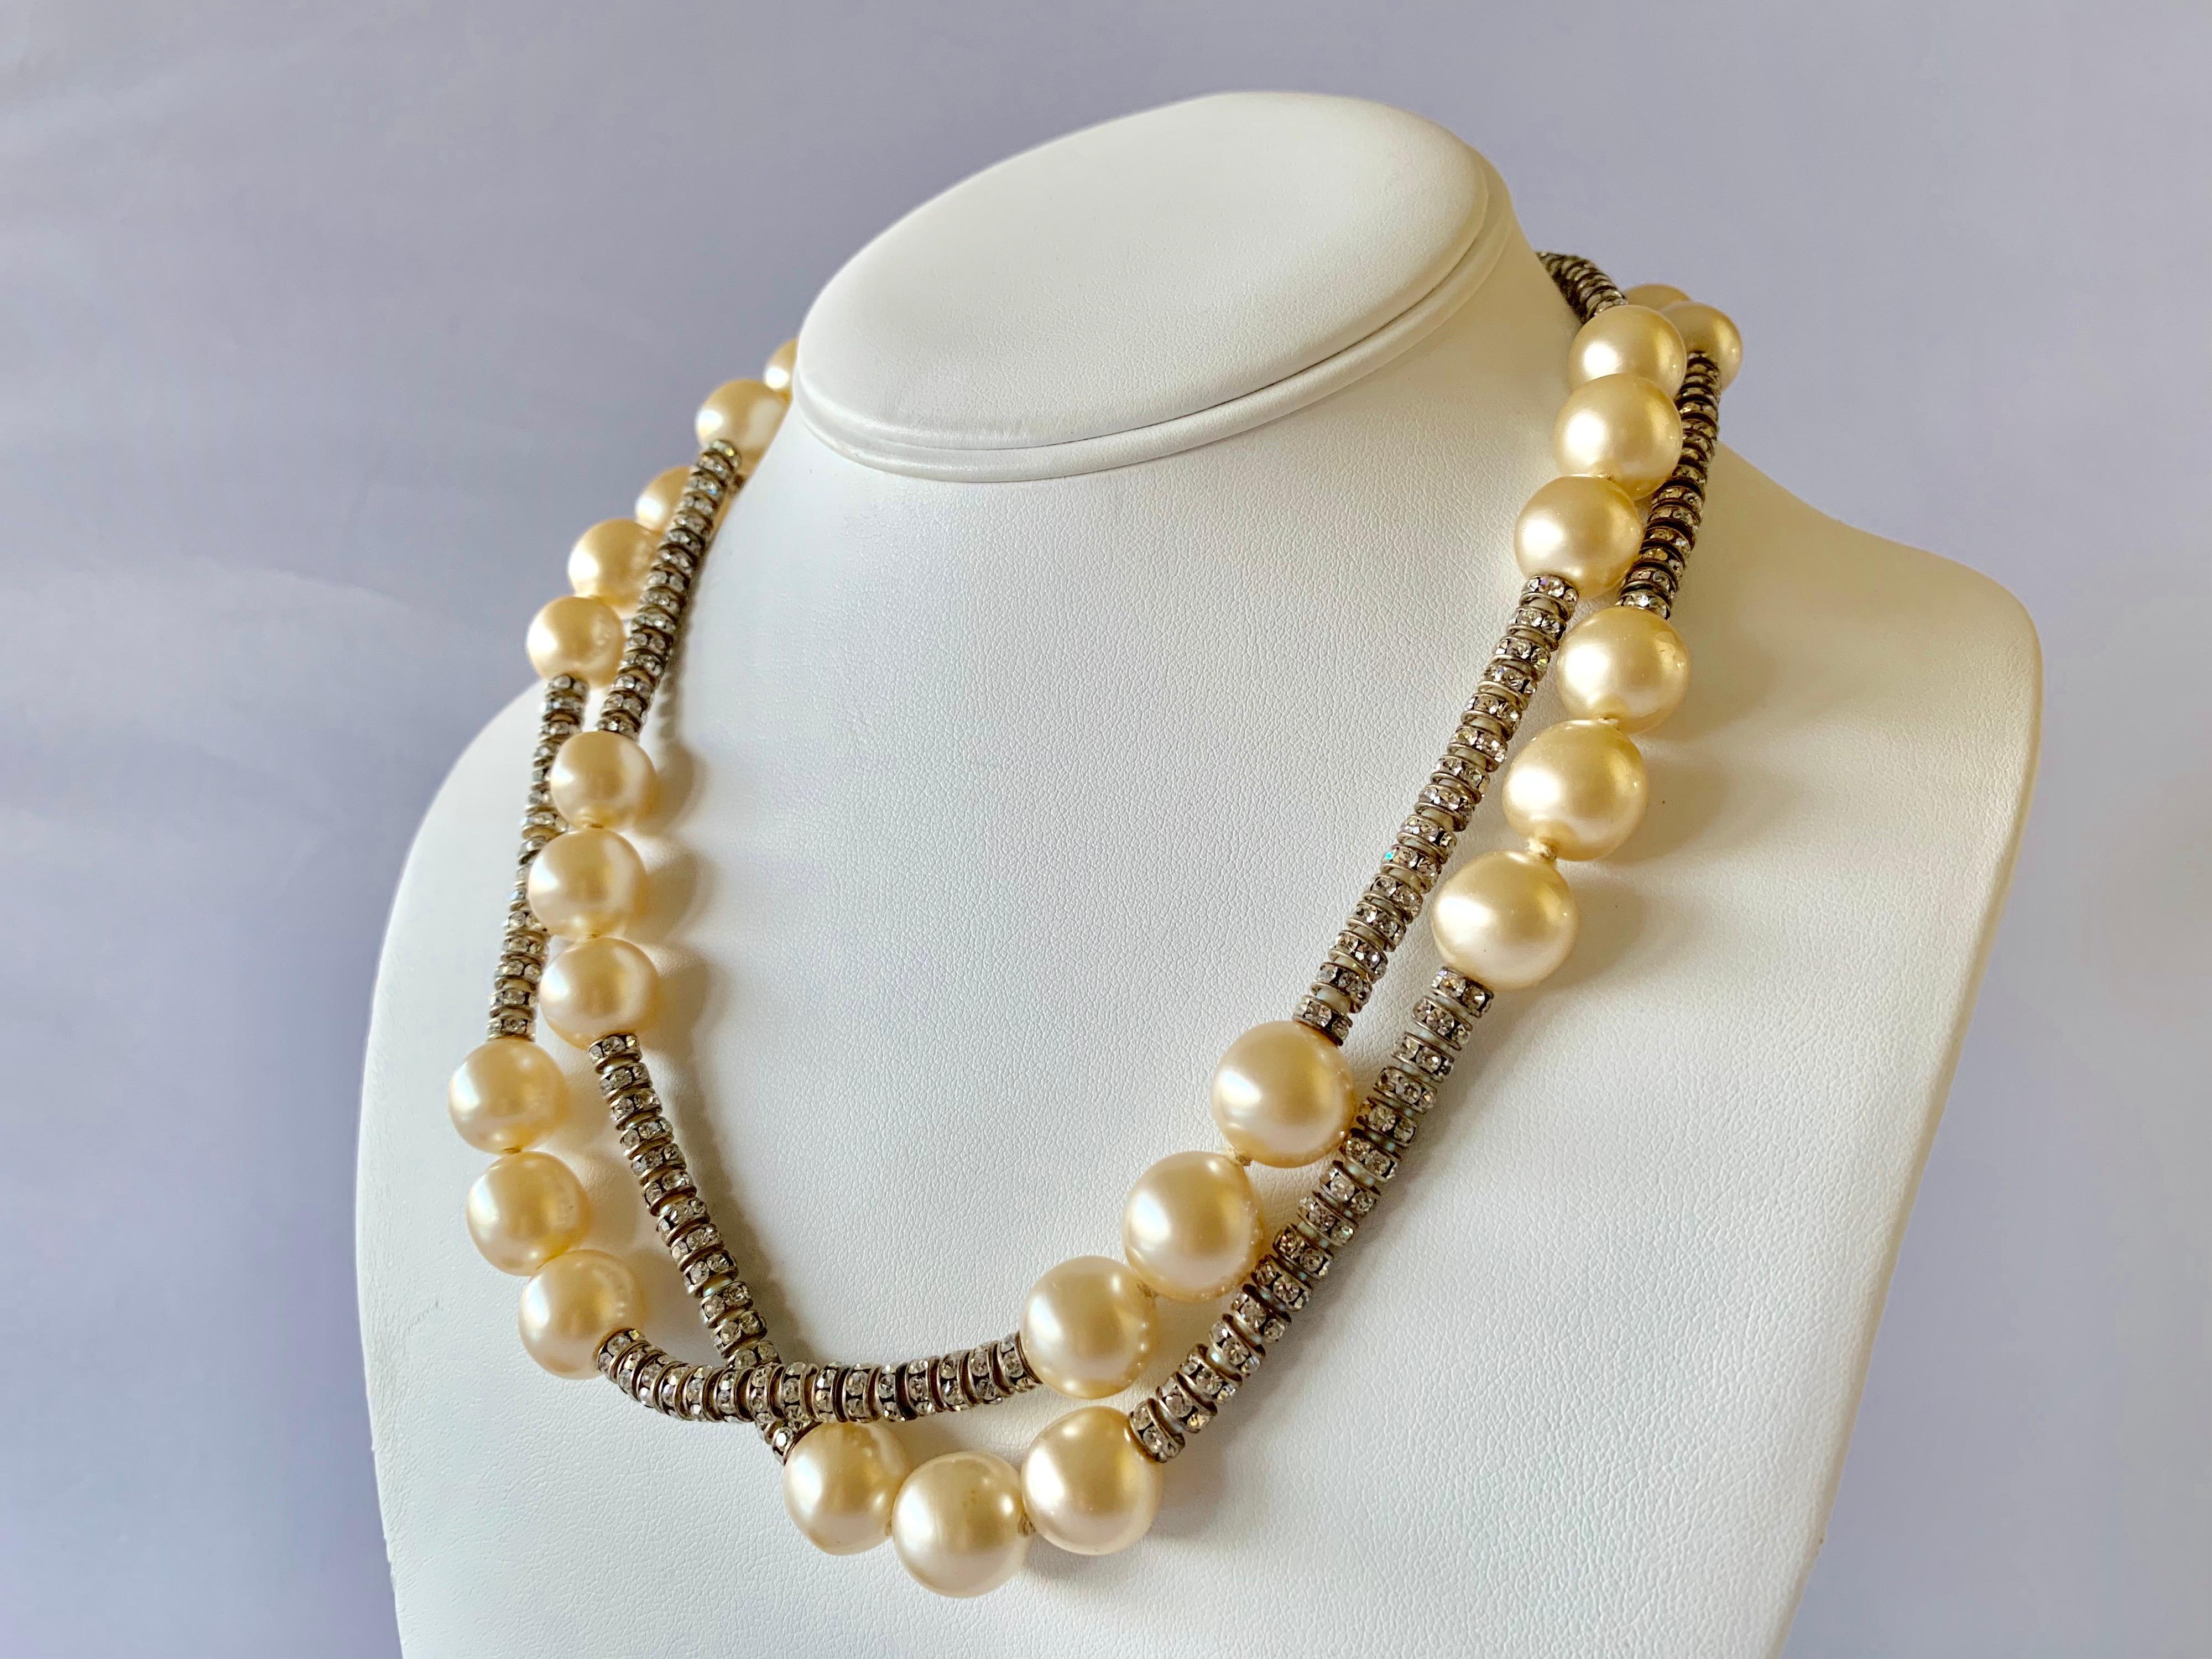 Vintage Coco Chanel silver-tone diamante and pearl statement necklace. The necklace is comprised of silver-tone metal rondels covered by clear rhinestones in a long single strand - in all Coco Chanel fashion, the necklace is accented by her